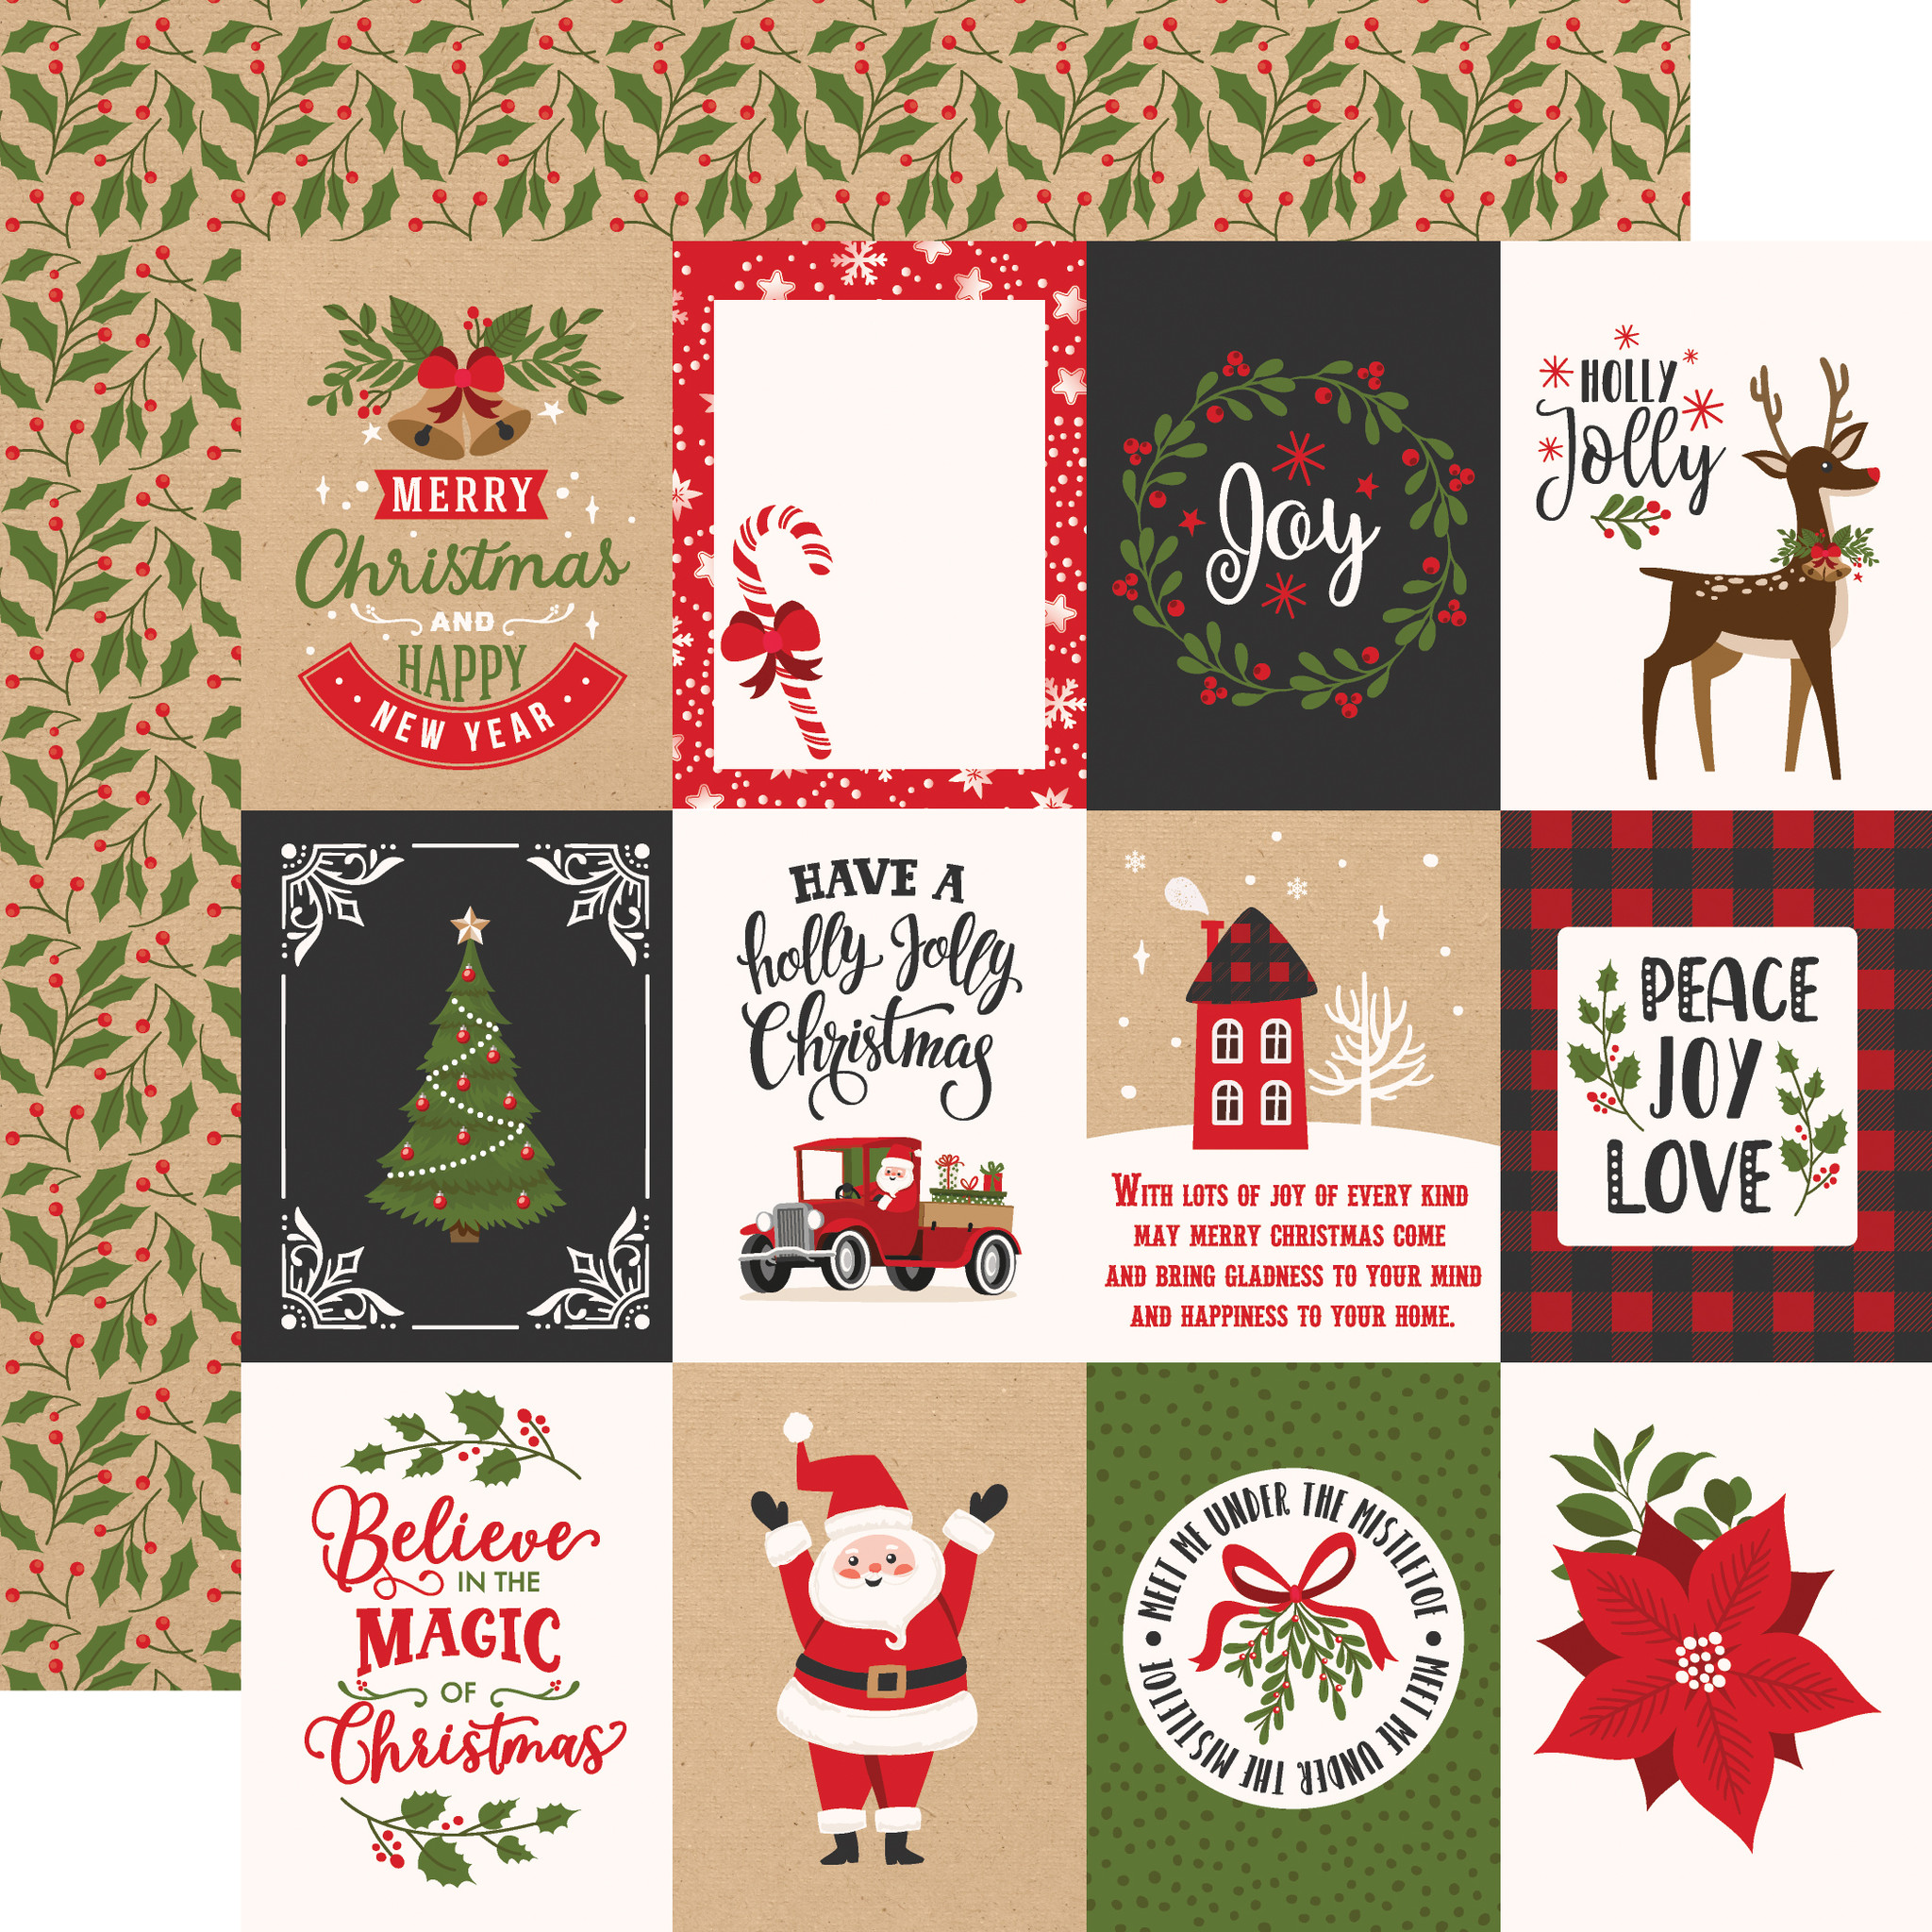 Journaling Cards 3x4 Paper - Echo Park - Christmas Time